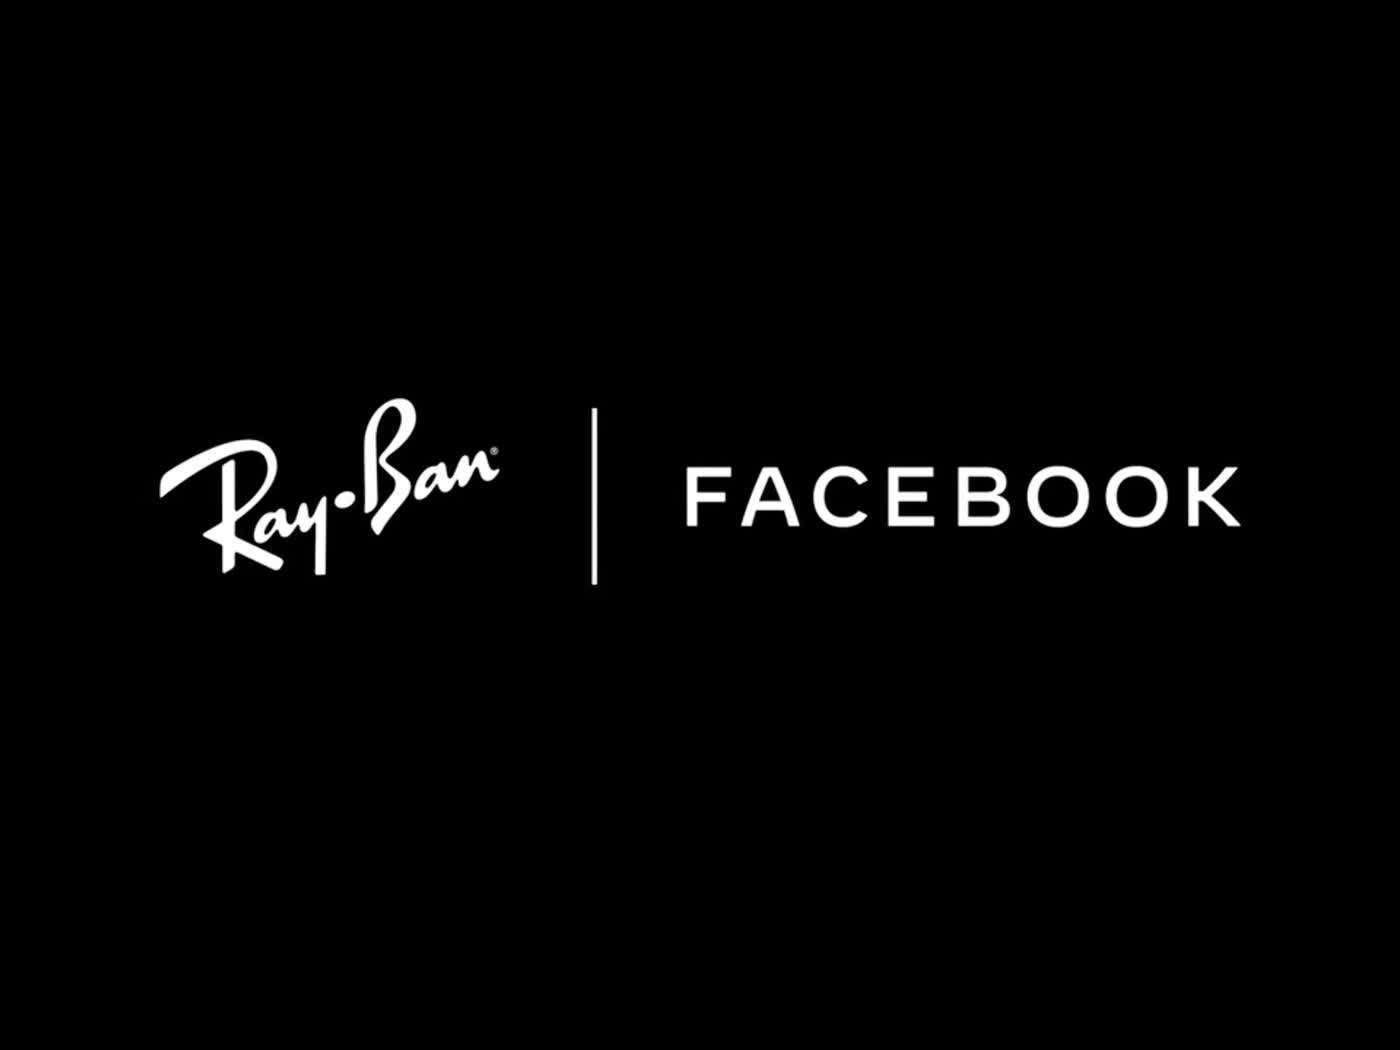 Ray-Ban smart glasses are set to release this year, made in partnership with Facebook